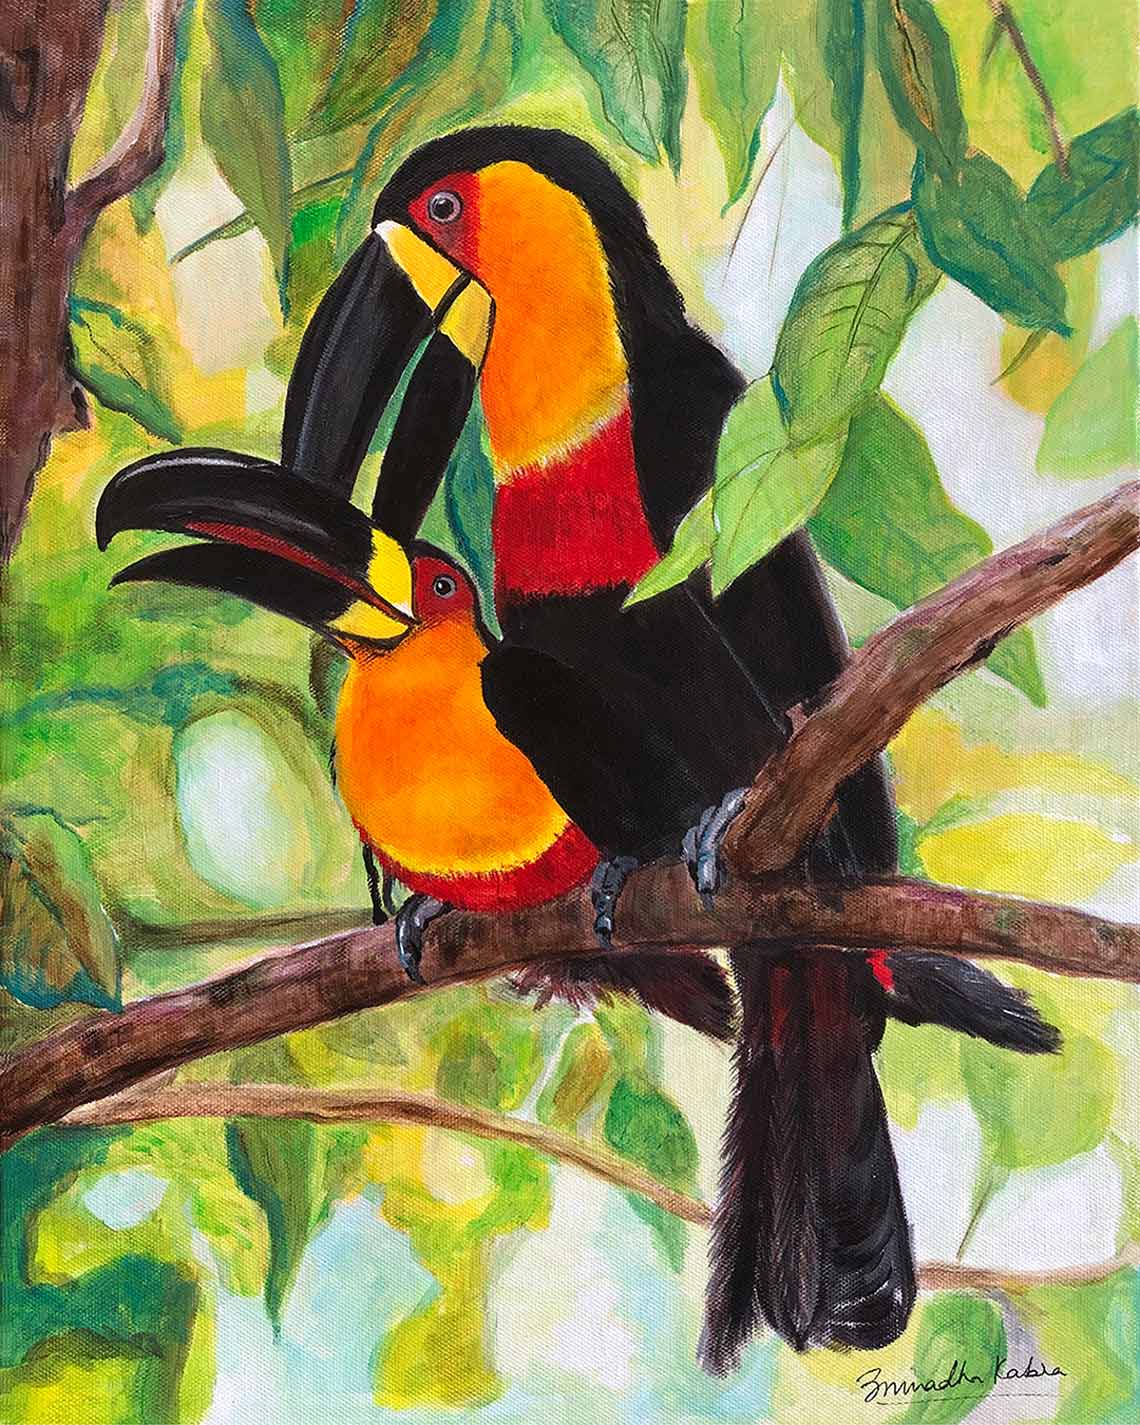 Buy painting online Singapore Heat and Dust Toucan Anuradha Kabra India Exquisite Art